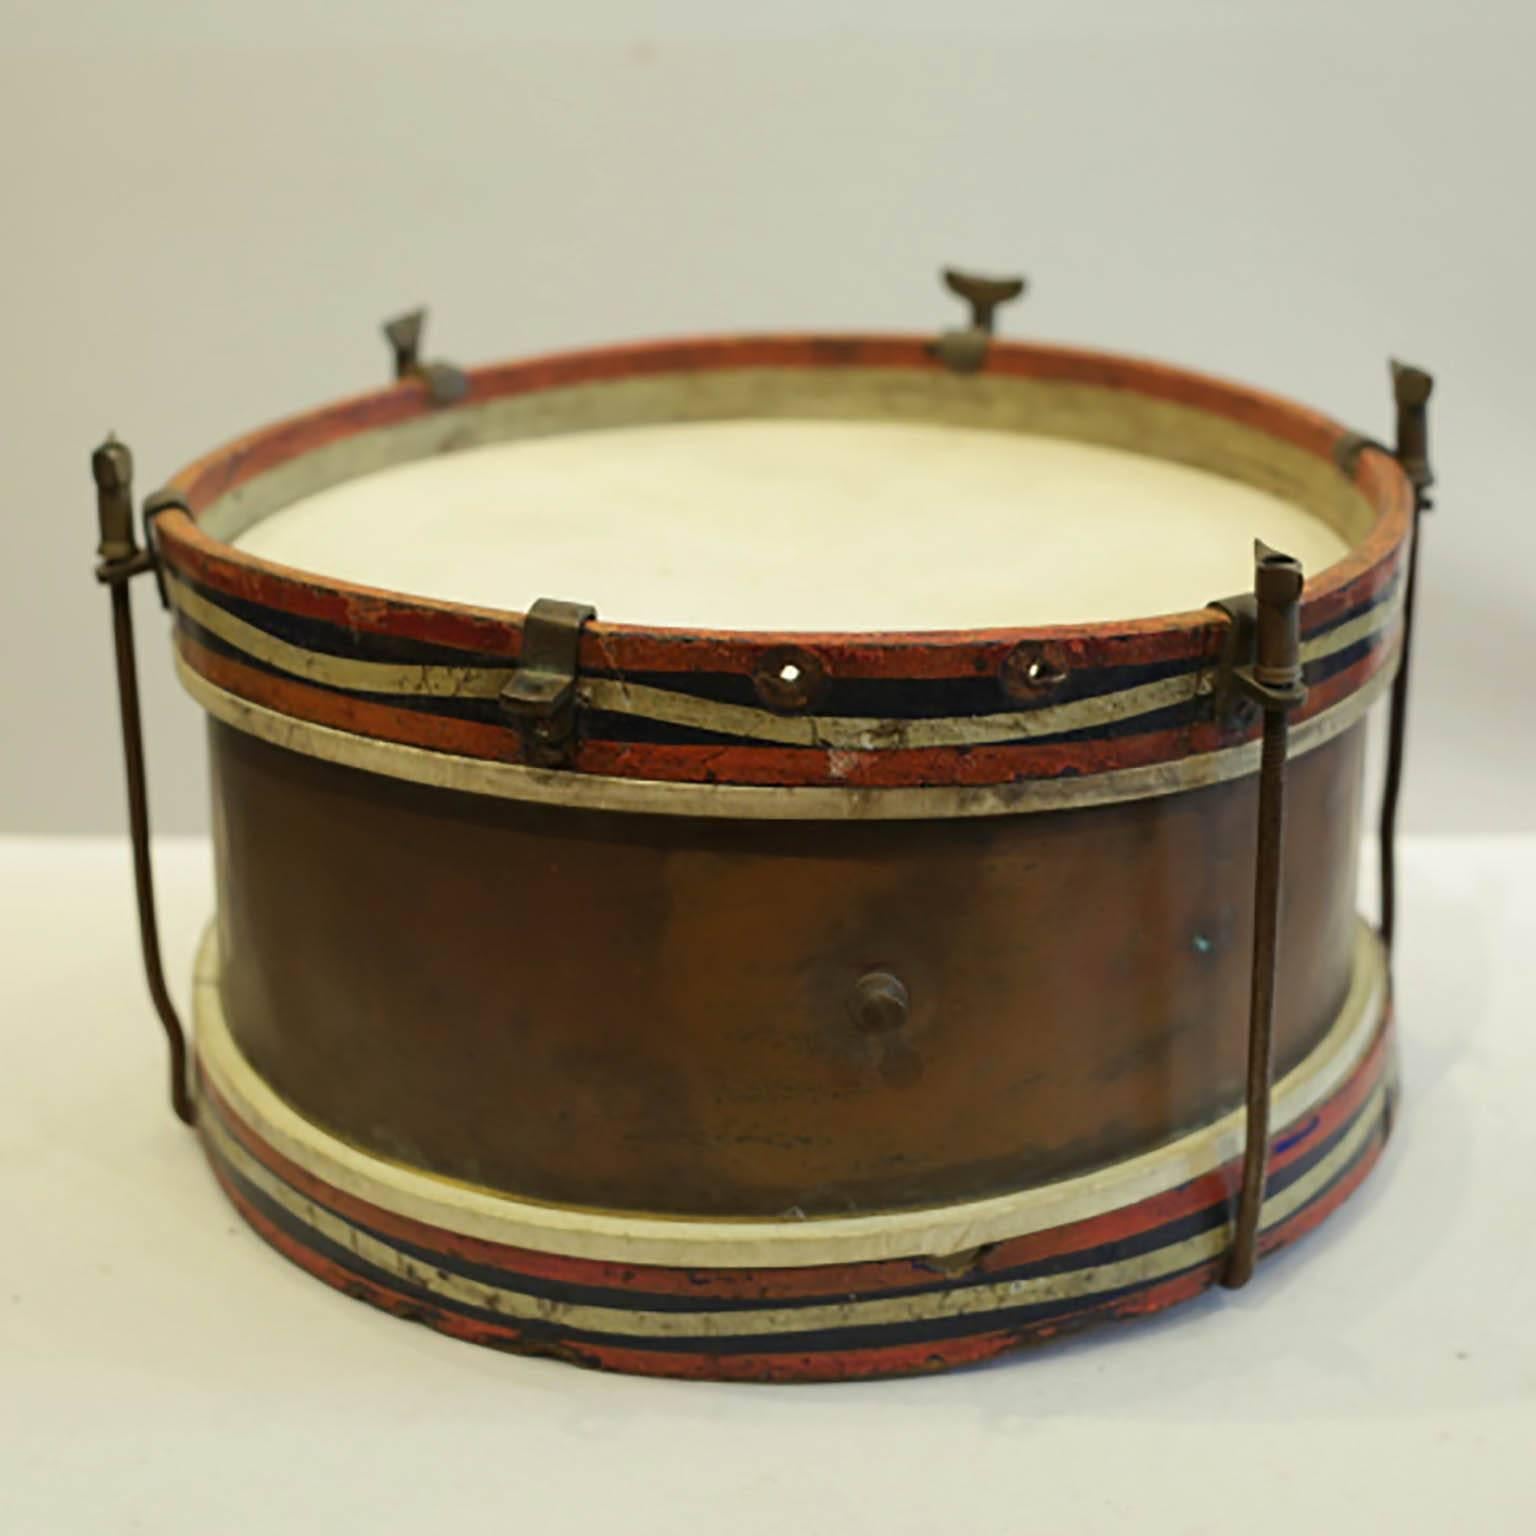 Vintage brass, wood and stretched calfskin snare drum. The calfskin has no cracks and is intact. The drum retains is original painted detailing on the sides. Possibly used in a marching band. The piece has retained its original finish and is in